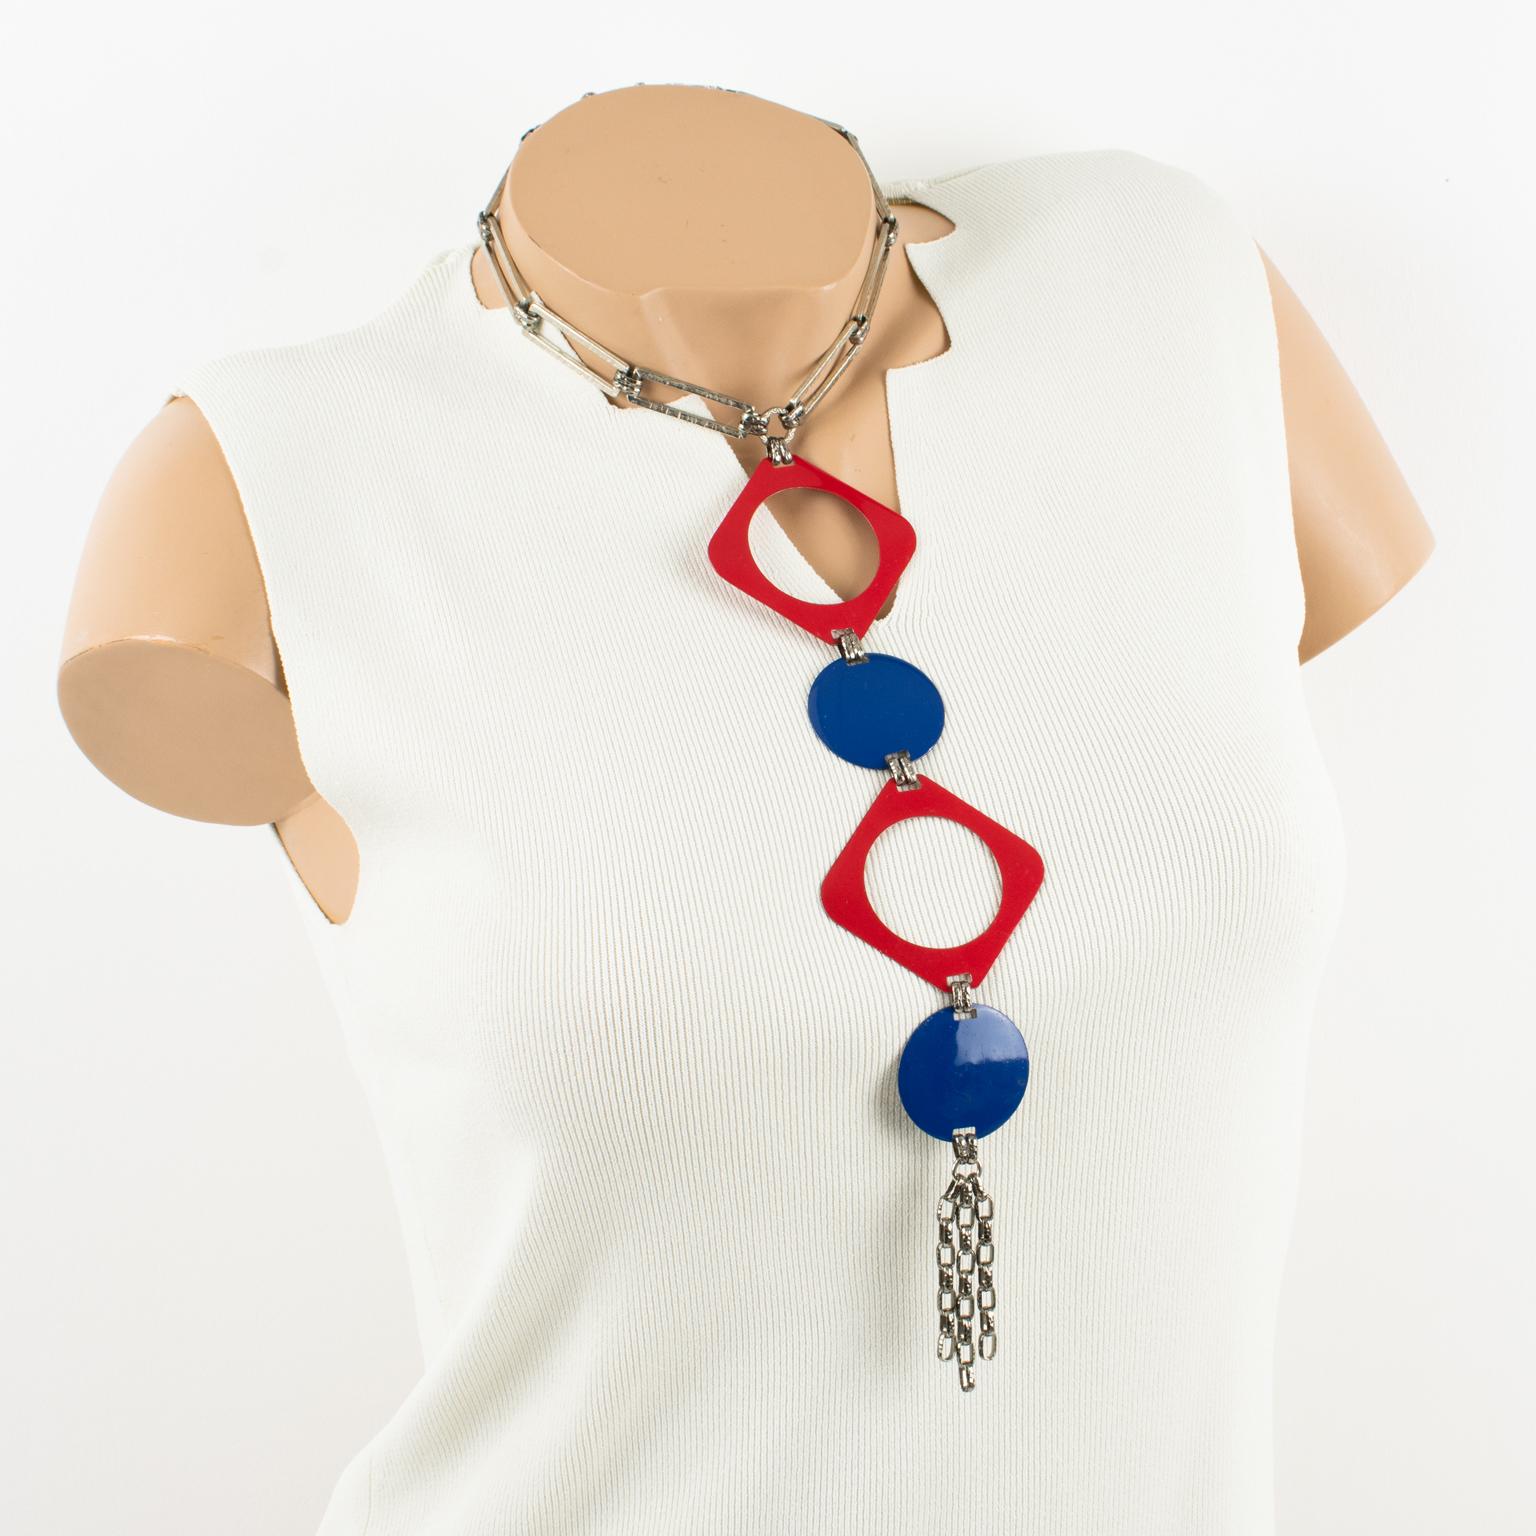 This stunning collar necklace with Space Age design was designed in France in the 1960s. This piece is nicely made and is reminiscent of Paco Rabanne's metal jewelry work. The necklace features an around-the-neck stainless steel heavy-worked link